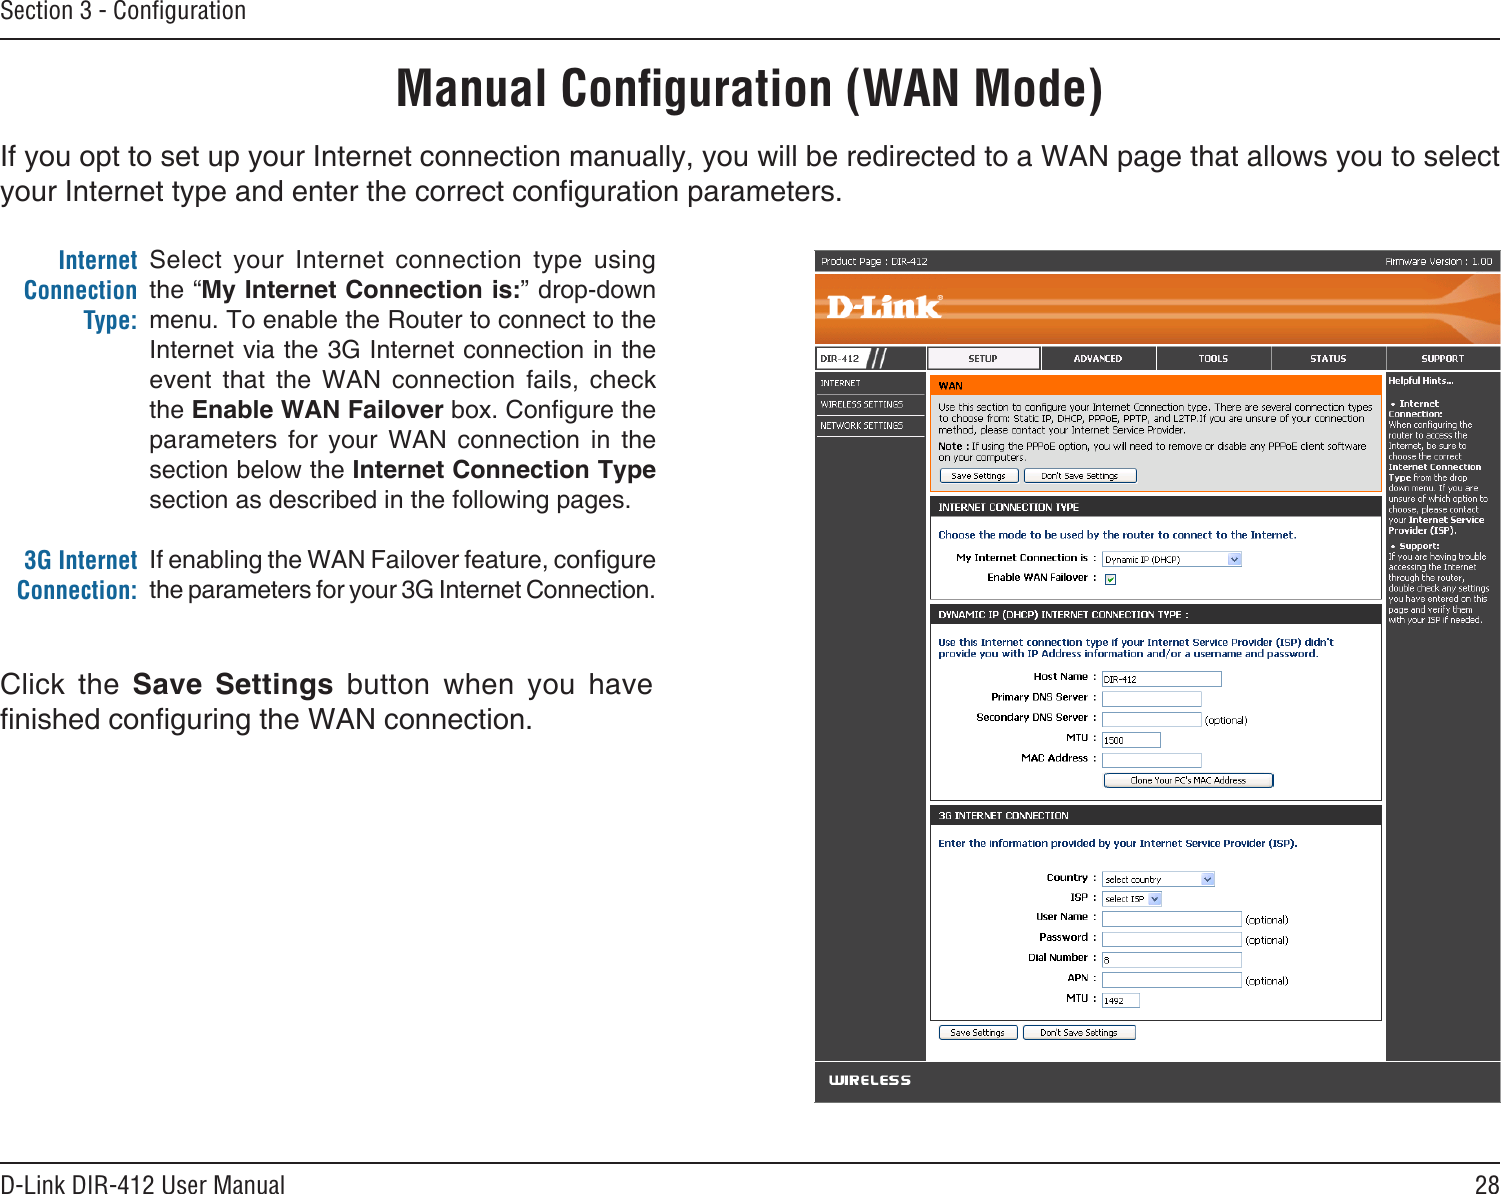 28D-Link DIR-412 User ManualSection 3 - ConﬁgurationIf you opt to set up your Internet connection manually, you will be redirected to a WAN page that allows you to select your Internet type and enter the correct conguration parameters.Manual Conﬁguration (WAN Mode)Select  your  Internet  connection  type  using the “My Internet Connection is:” drop-down menu. To enable the Router to connect to the Internet via the 3G Internet connection in the event  that  the  WAN  connection  fails,  check the Enable WAN Failover box. Congure the parameters  for  your  WAN  connection  in  the section below the Internet Connection Type section as described in the following pages.If enabling the WAN Failover feature, congure the parameters for your 3G Internet Connection.Internet Connection Type: 3G Internet Connection:Click  the  Save  Settings  button  when  you  have nished conguring the WAN connection.